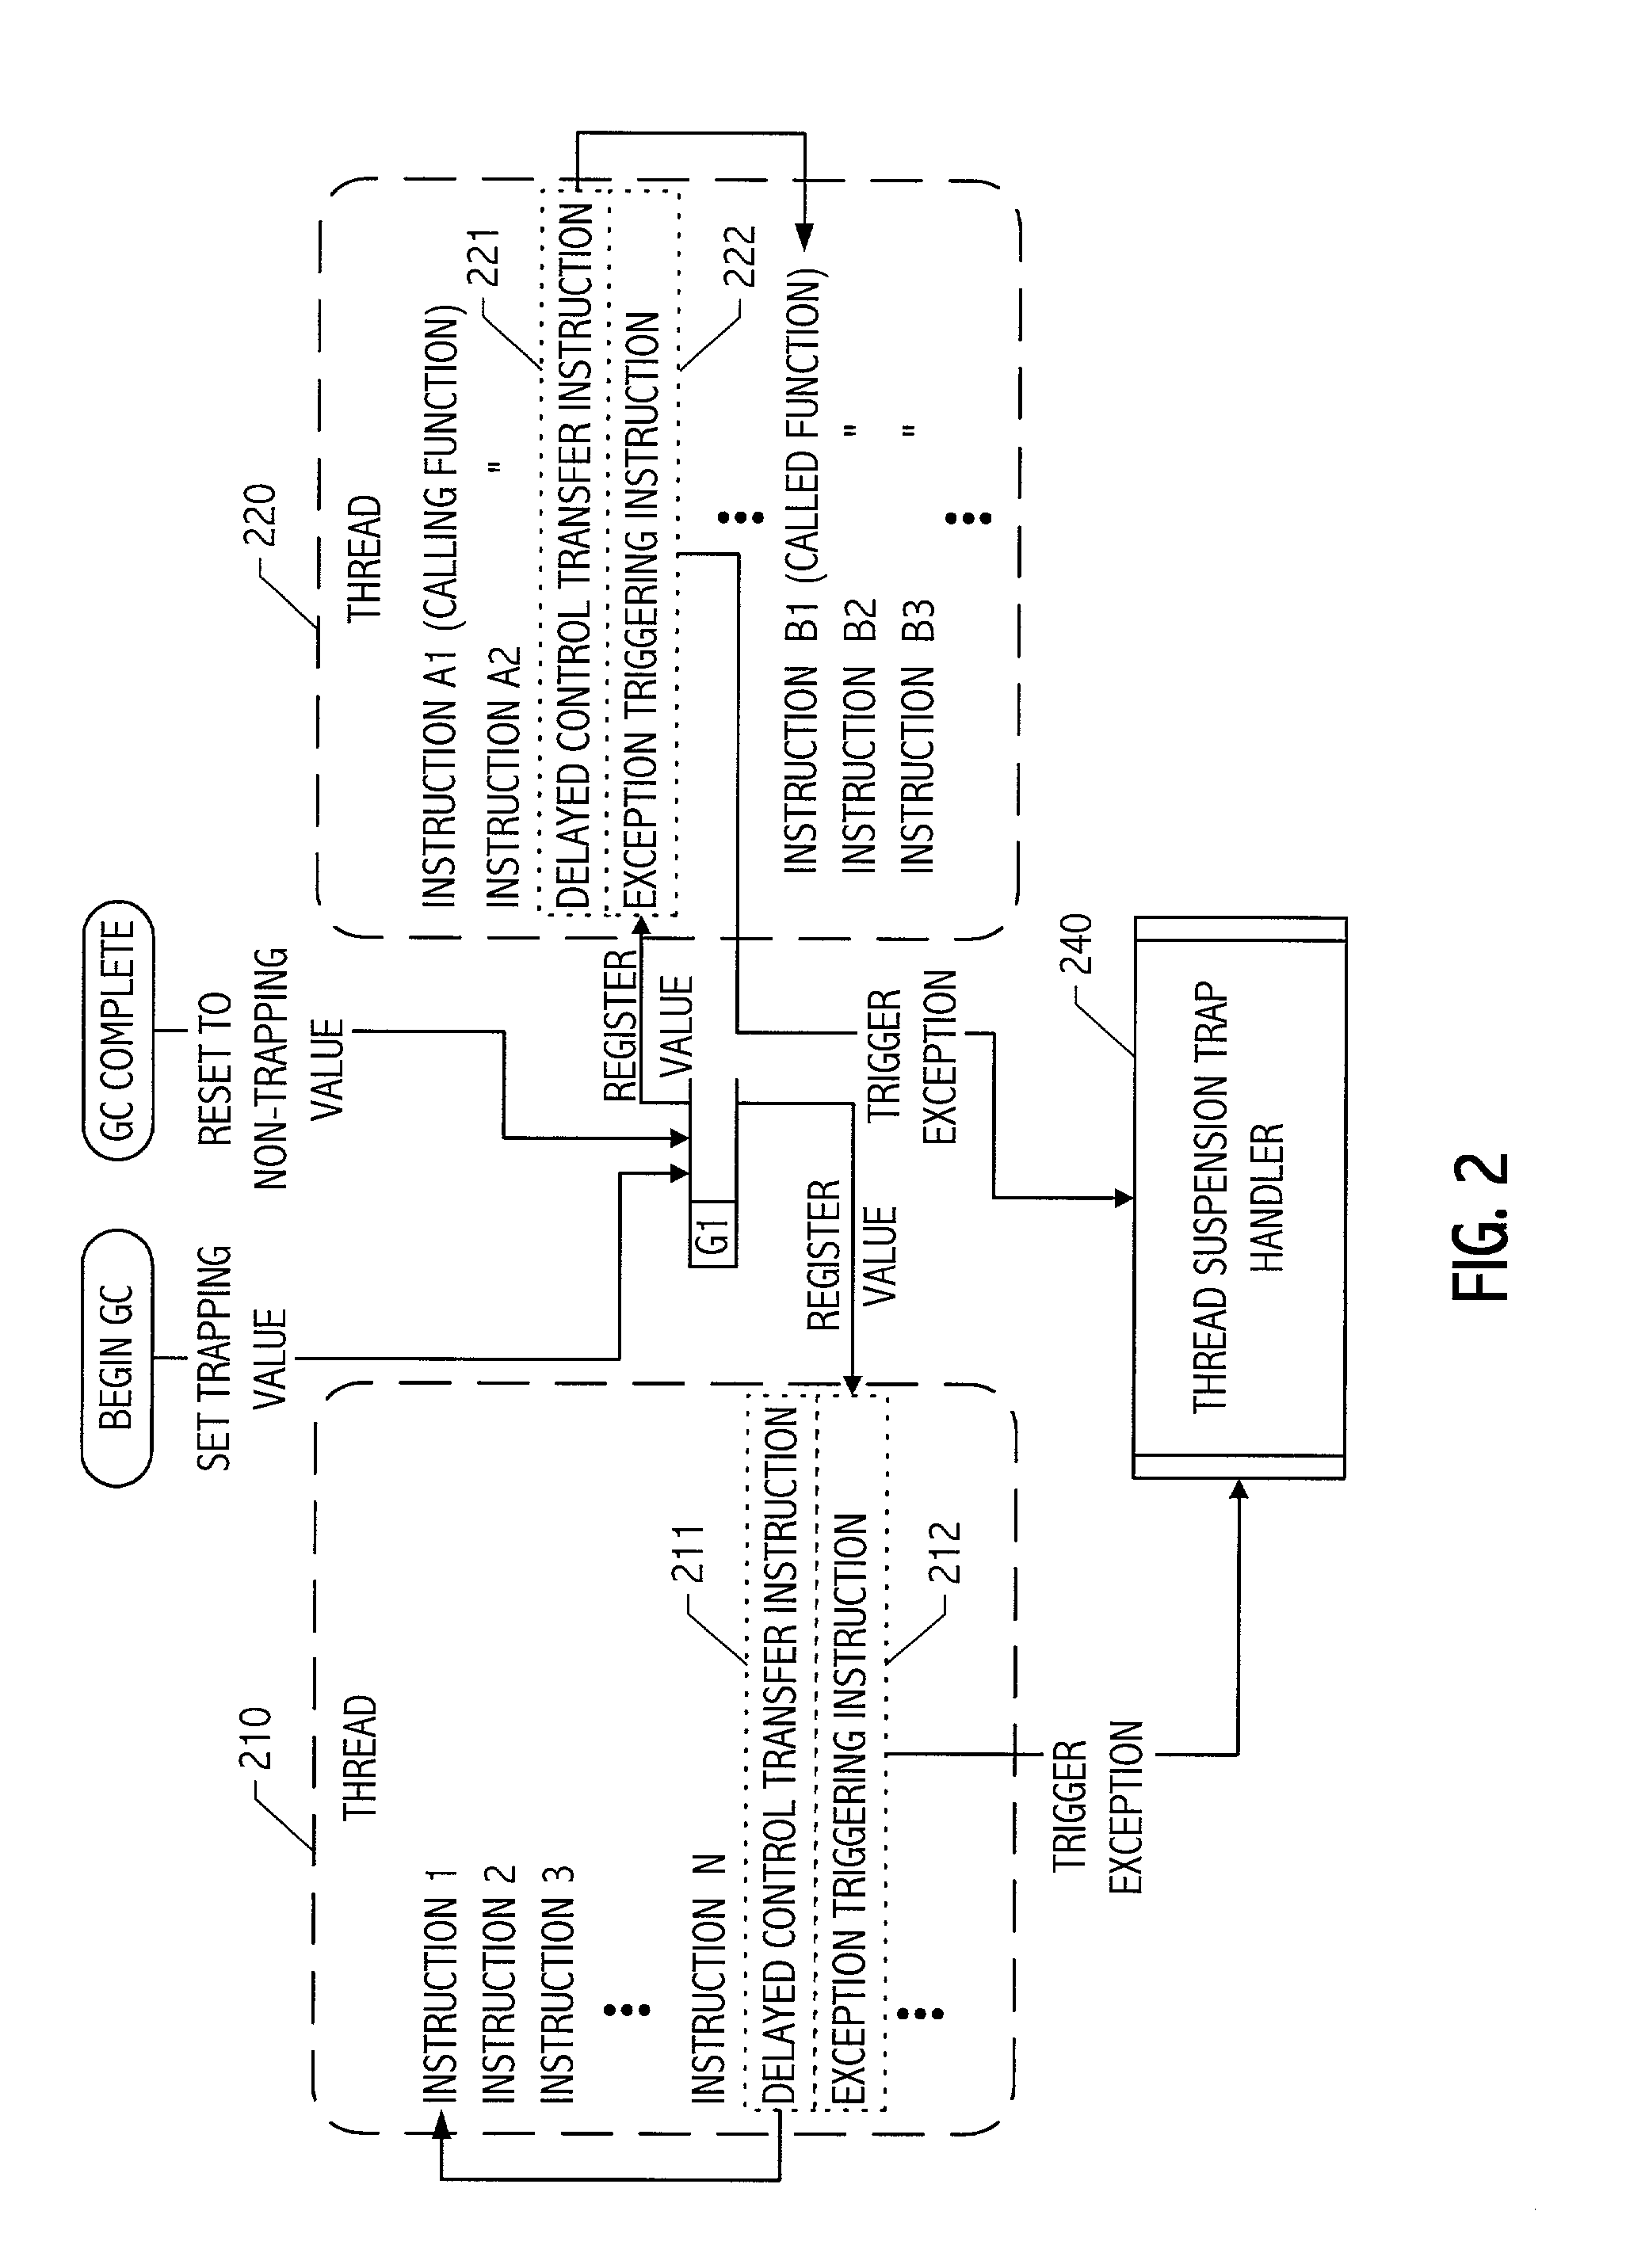 Thread suspension system and method using trapping instructions